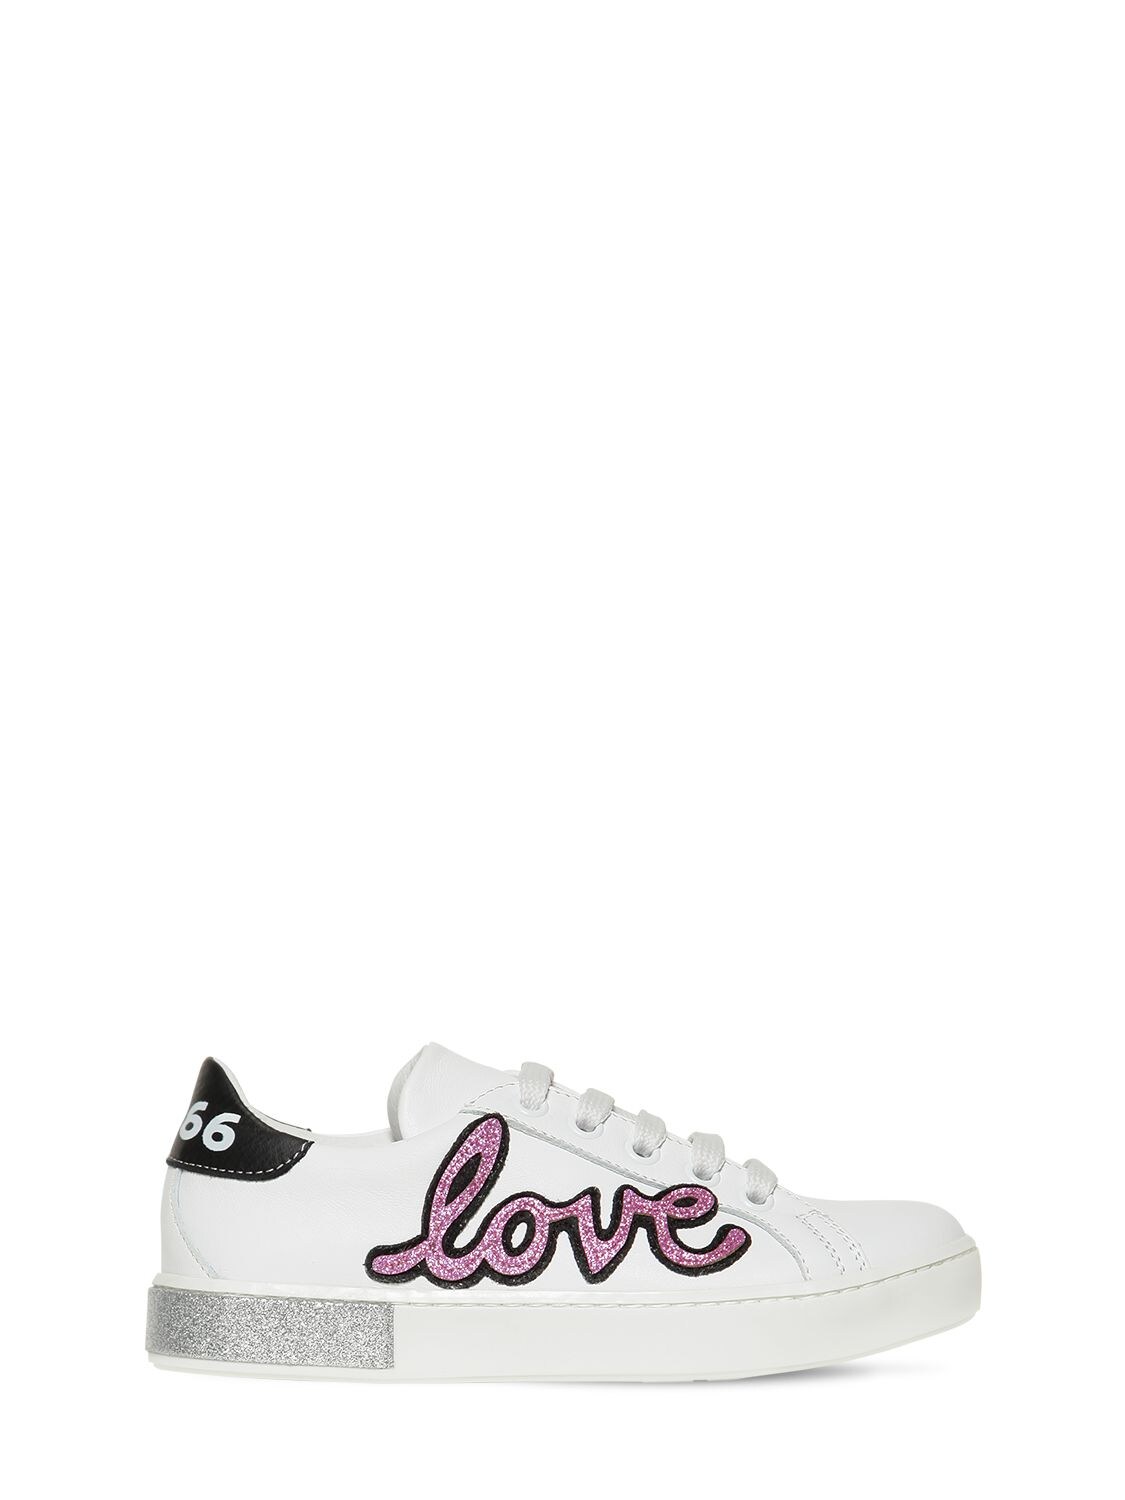 Am 66 Leather Sneakers W/ Glittered Details In White